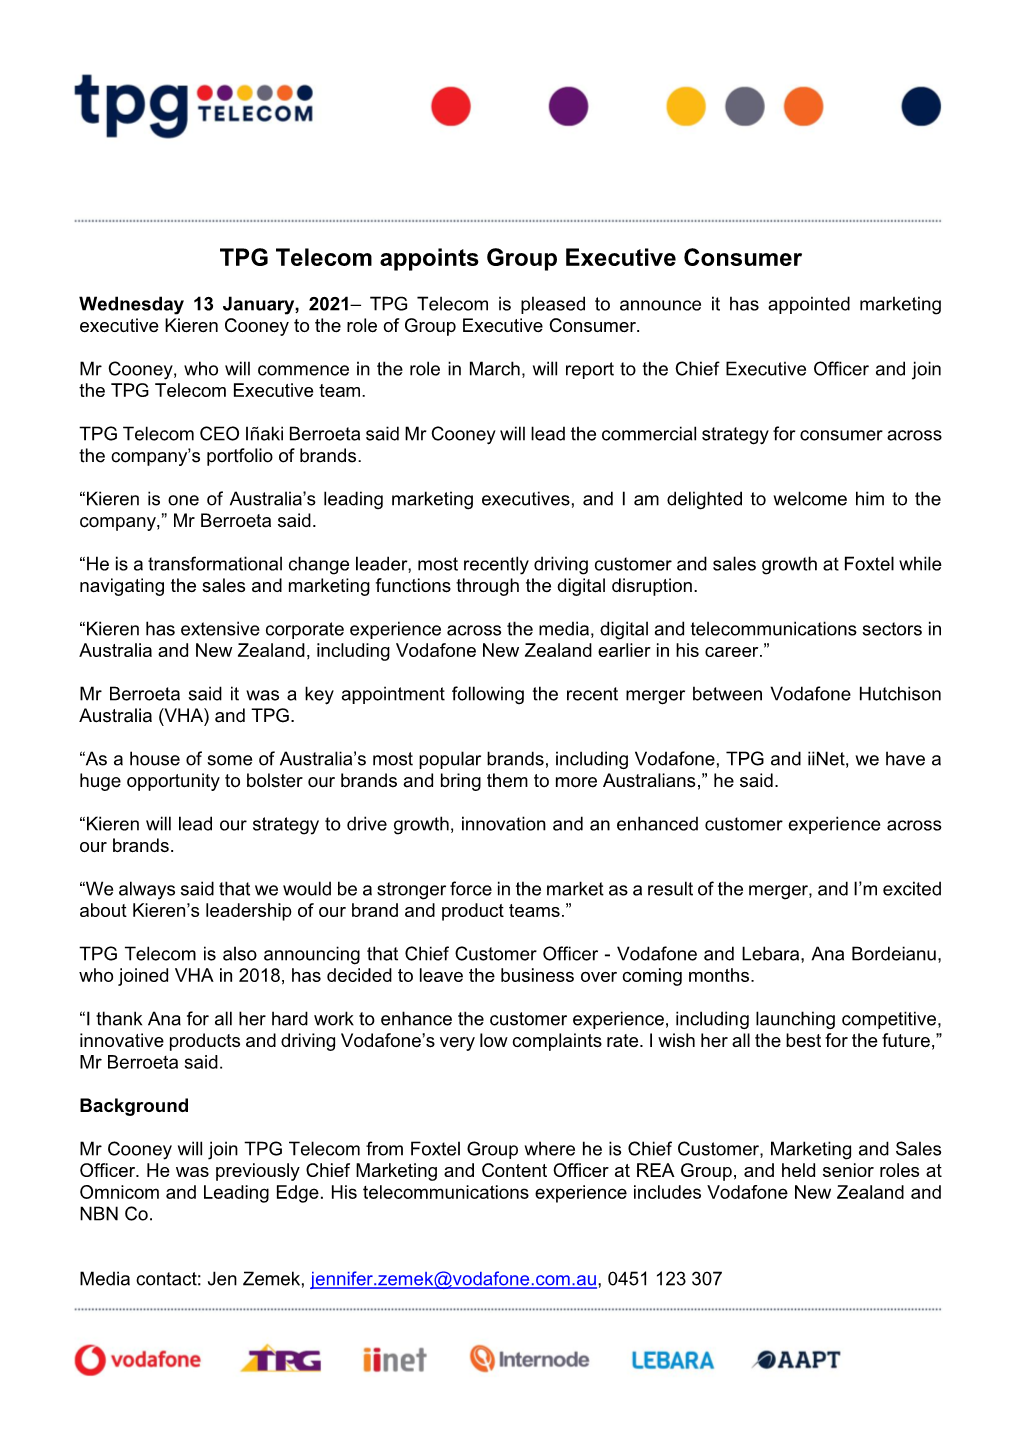 TPG Telecom Appoints Group Executive Consumer